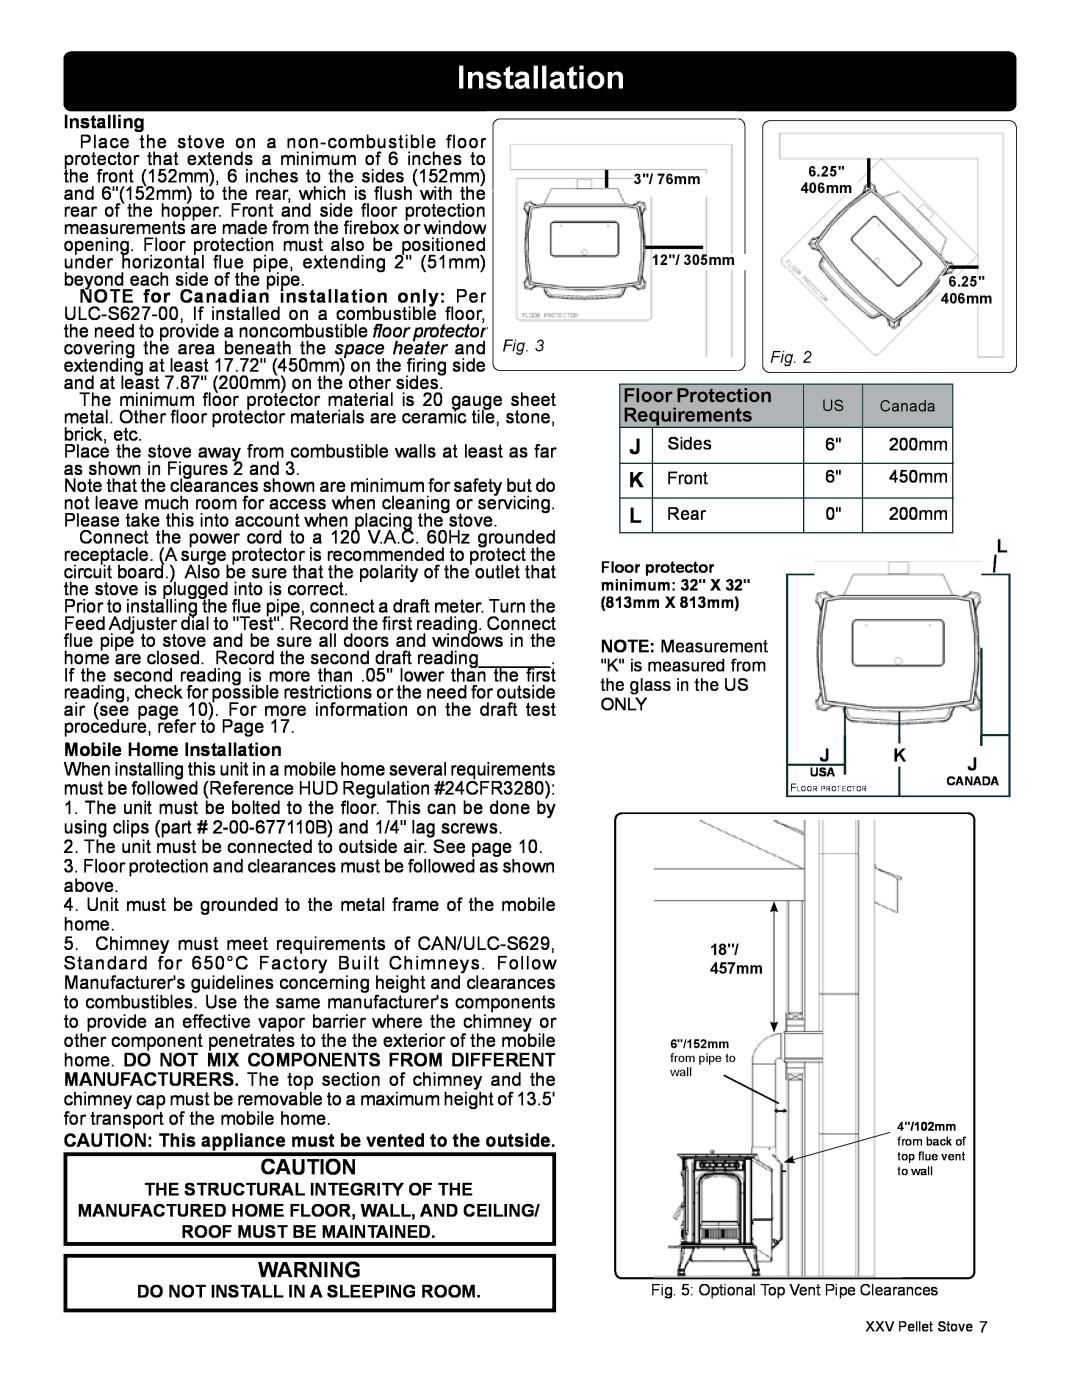 Harman Stove Company R16 manual Installation, Floor Protection, Installing, NOTE for Canadian installation only Per 